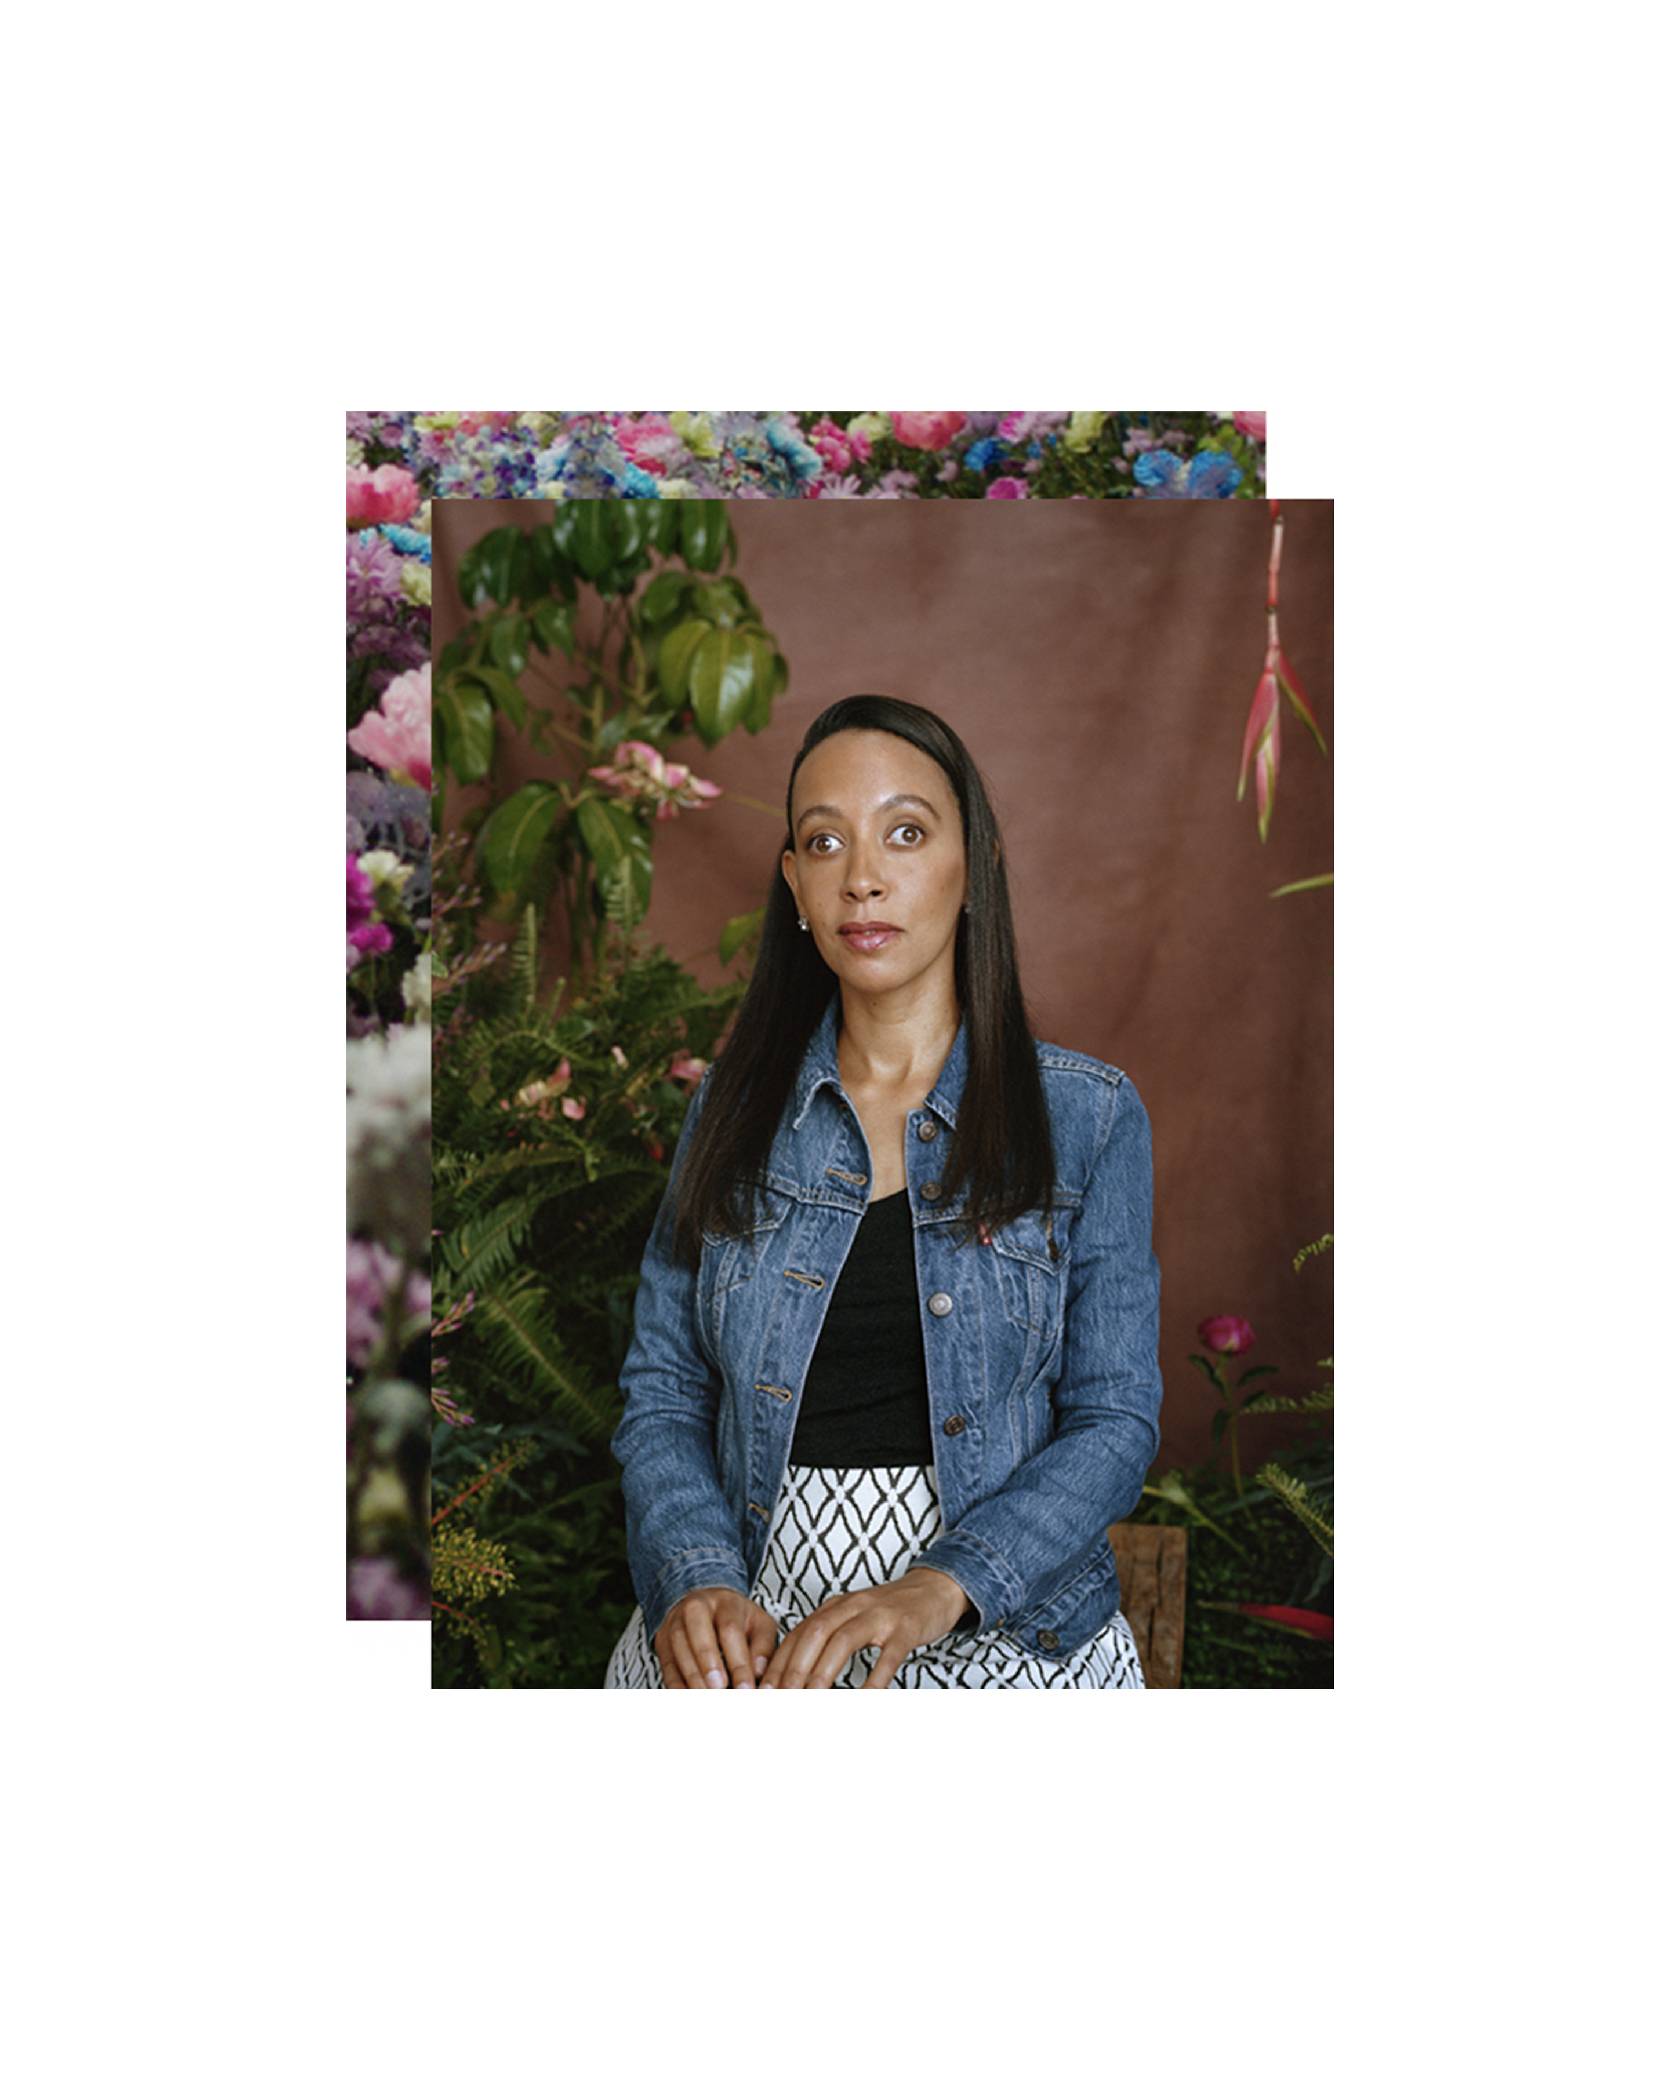 A portrait shot of Haben Girma wearing a jean jacket and white skirt